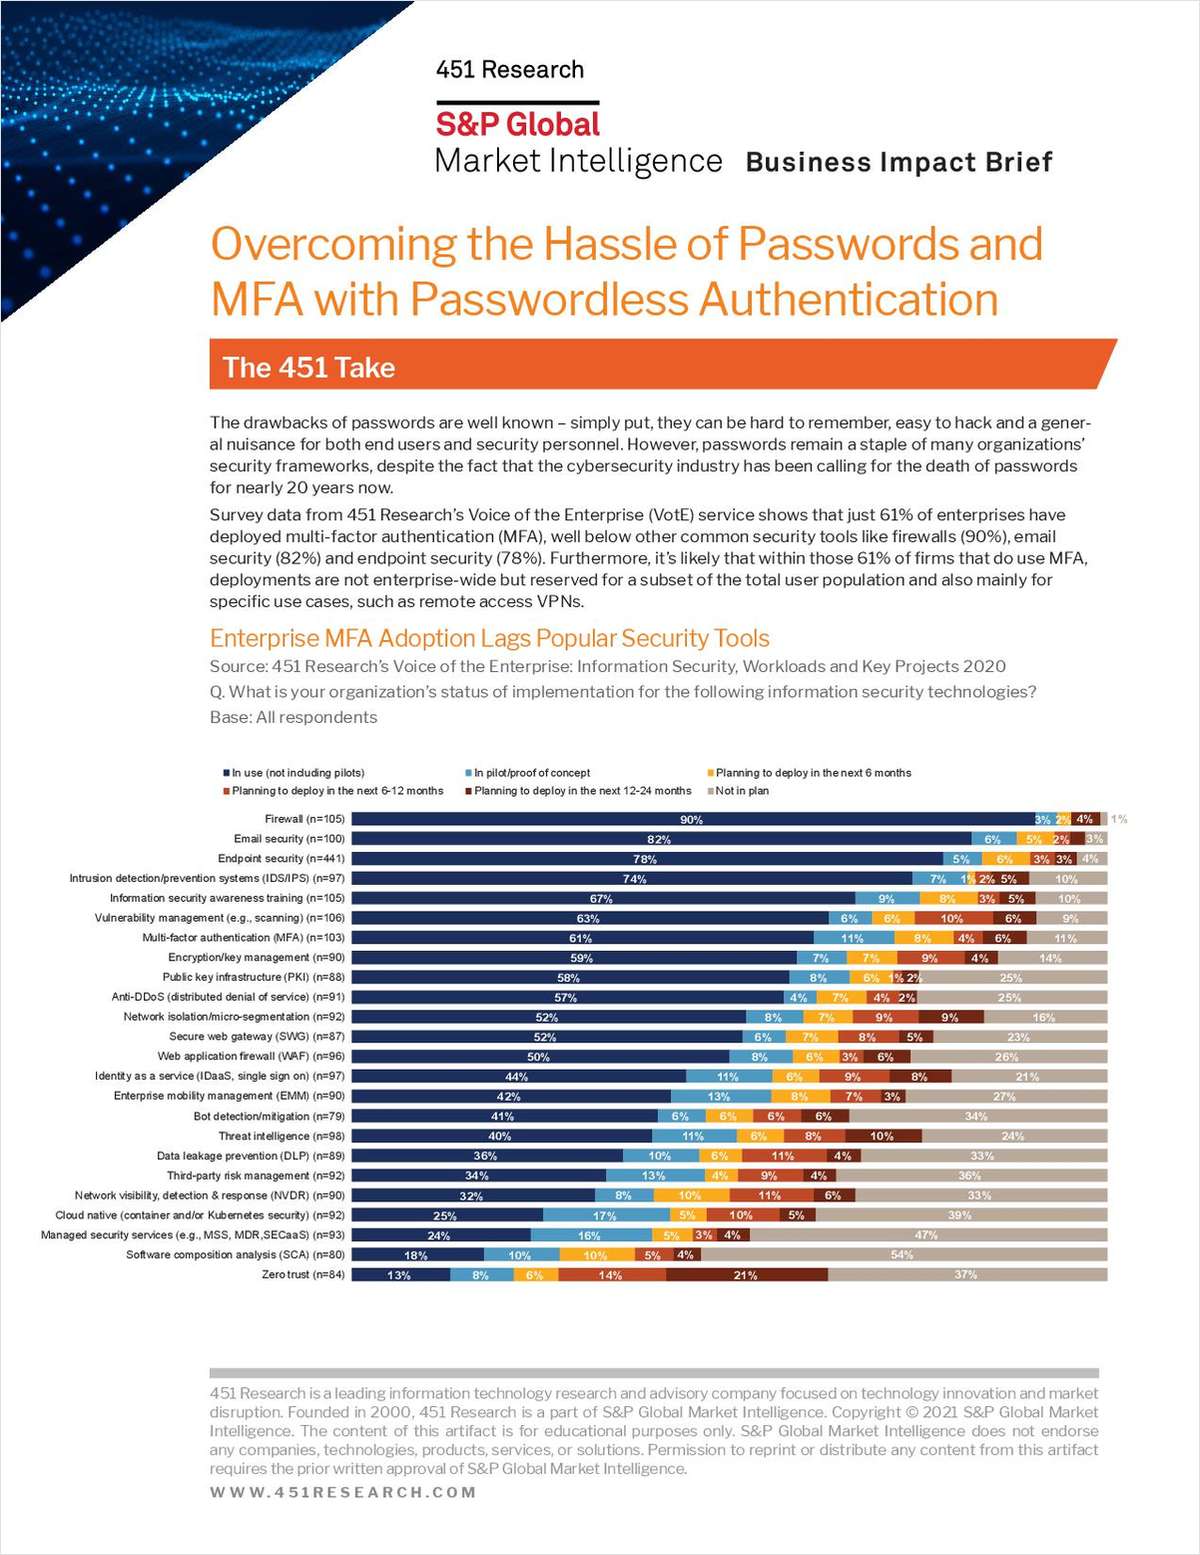 Overcoming the Hassle of Passwords and MFA with Passwordless Authentication